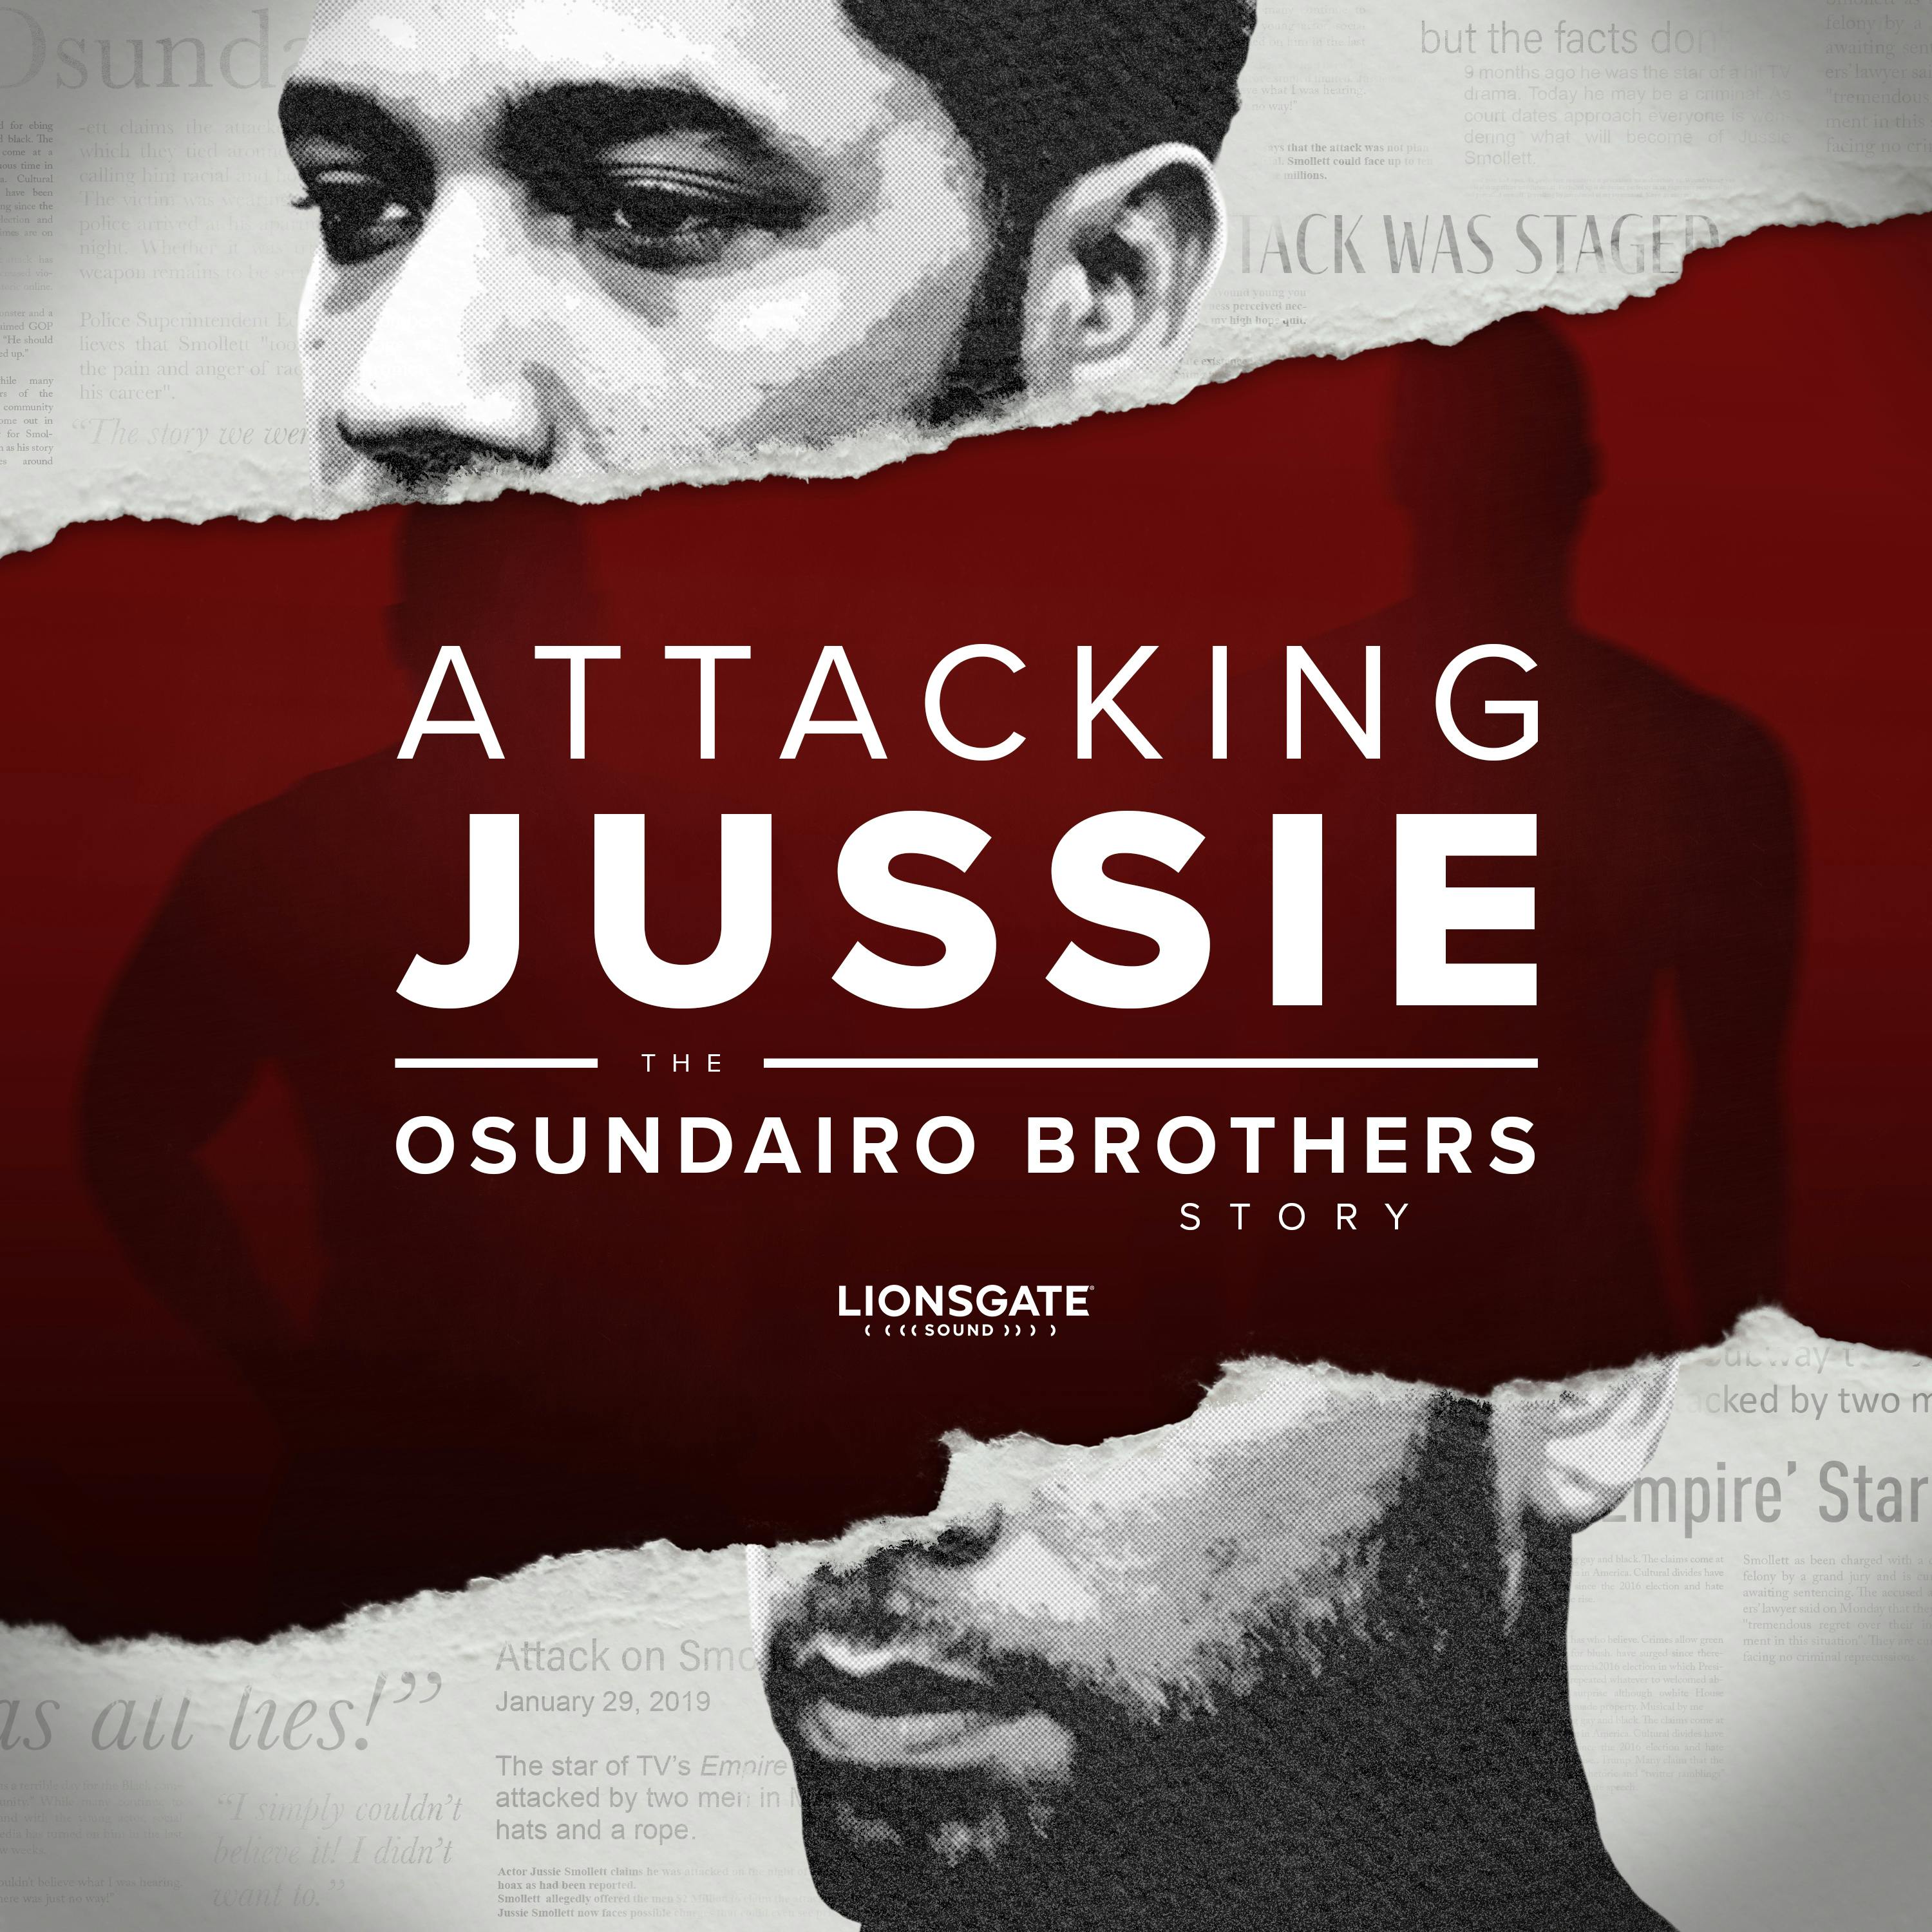 Attacking Jussie: The Osundairo Brothers Story podcast show image